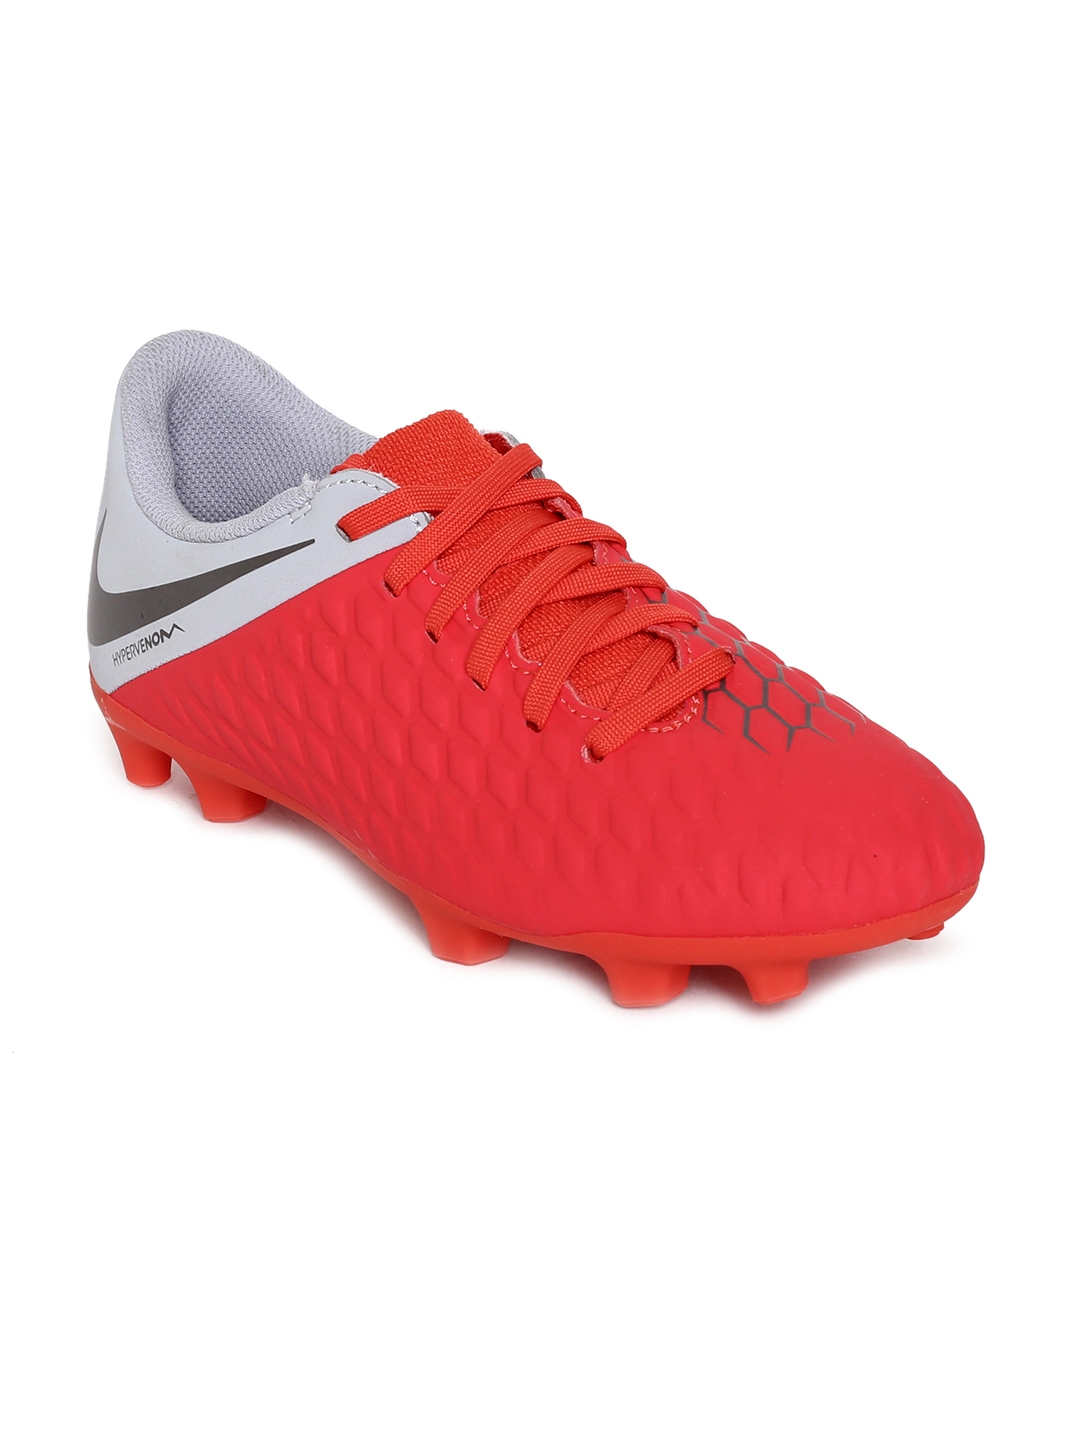 Buy Nike Unisex Red Football Shoes 